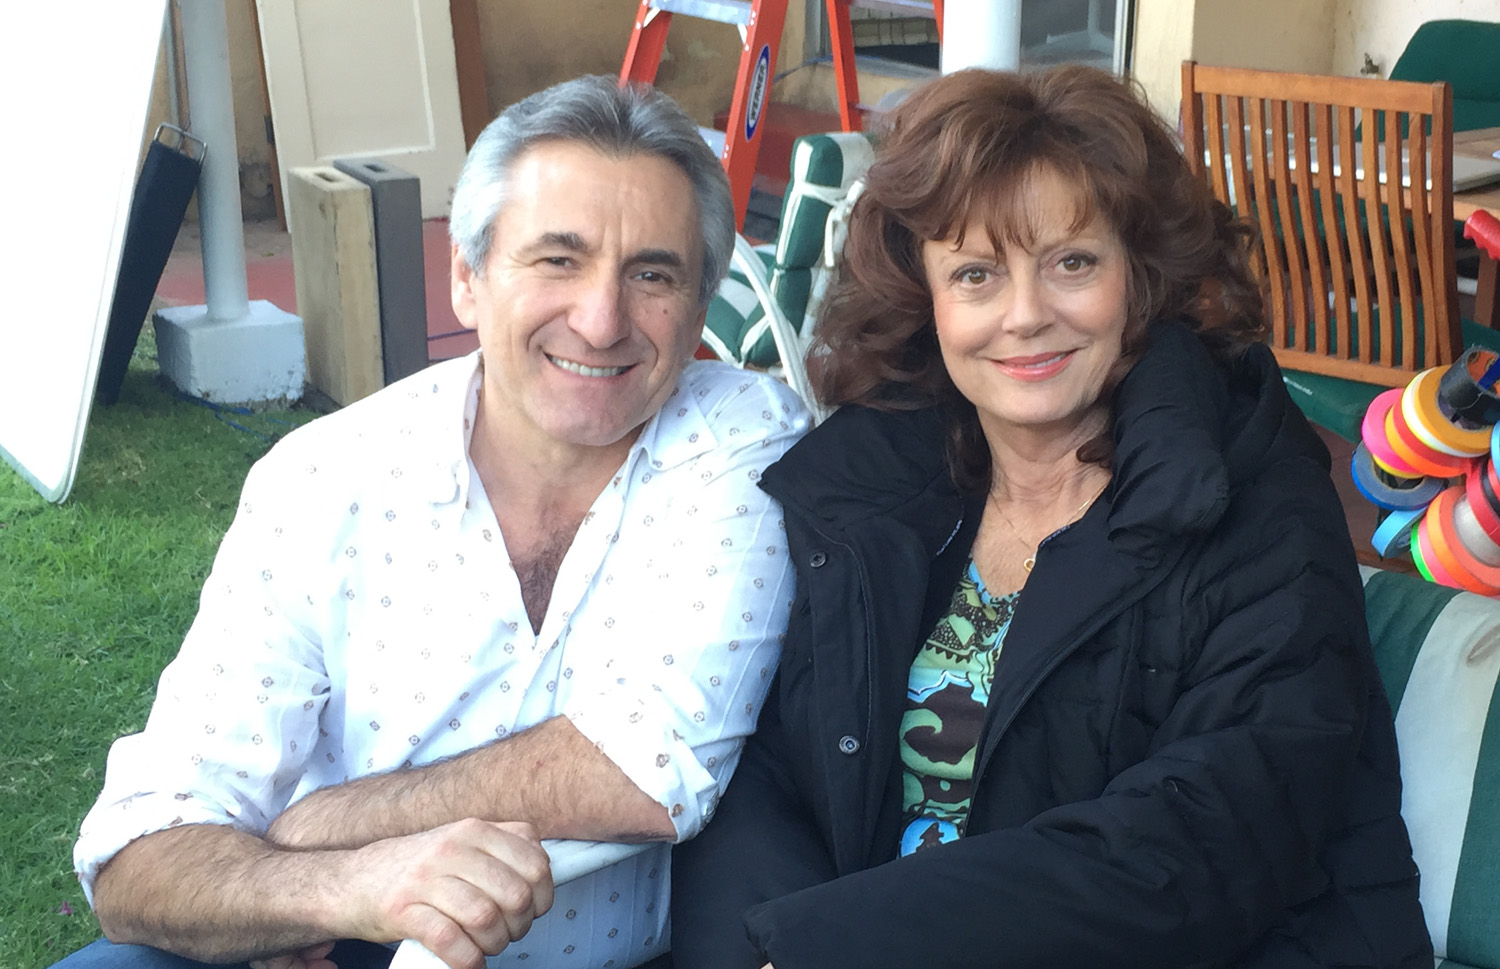 Susan Sarandon and Lou Volpe on the set of The Meddler